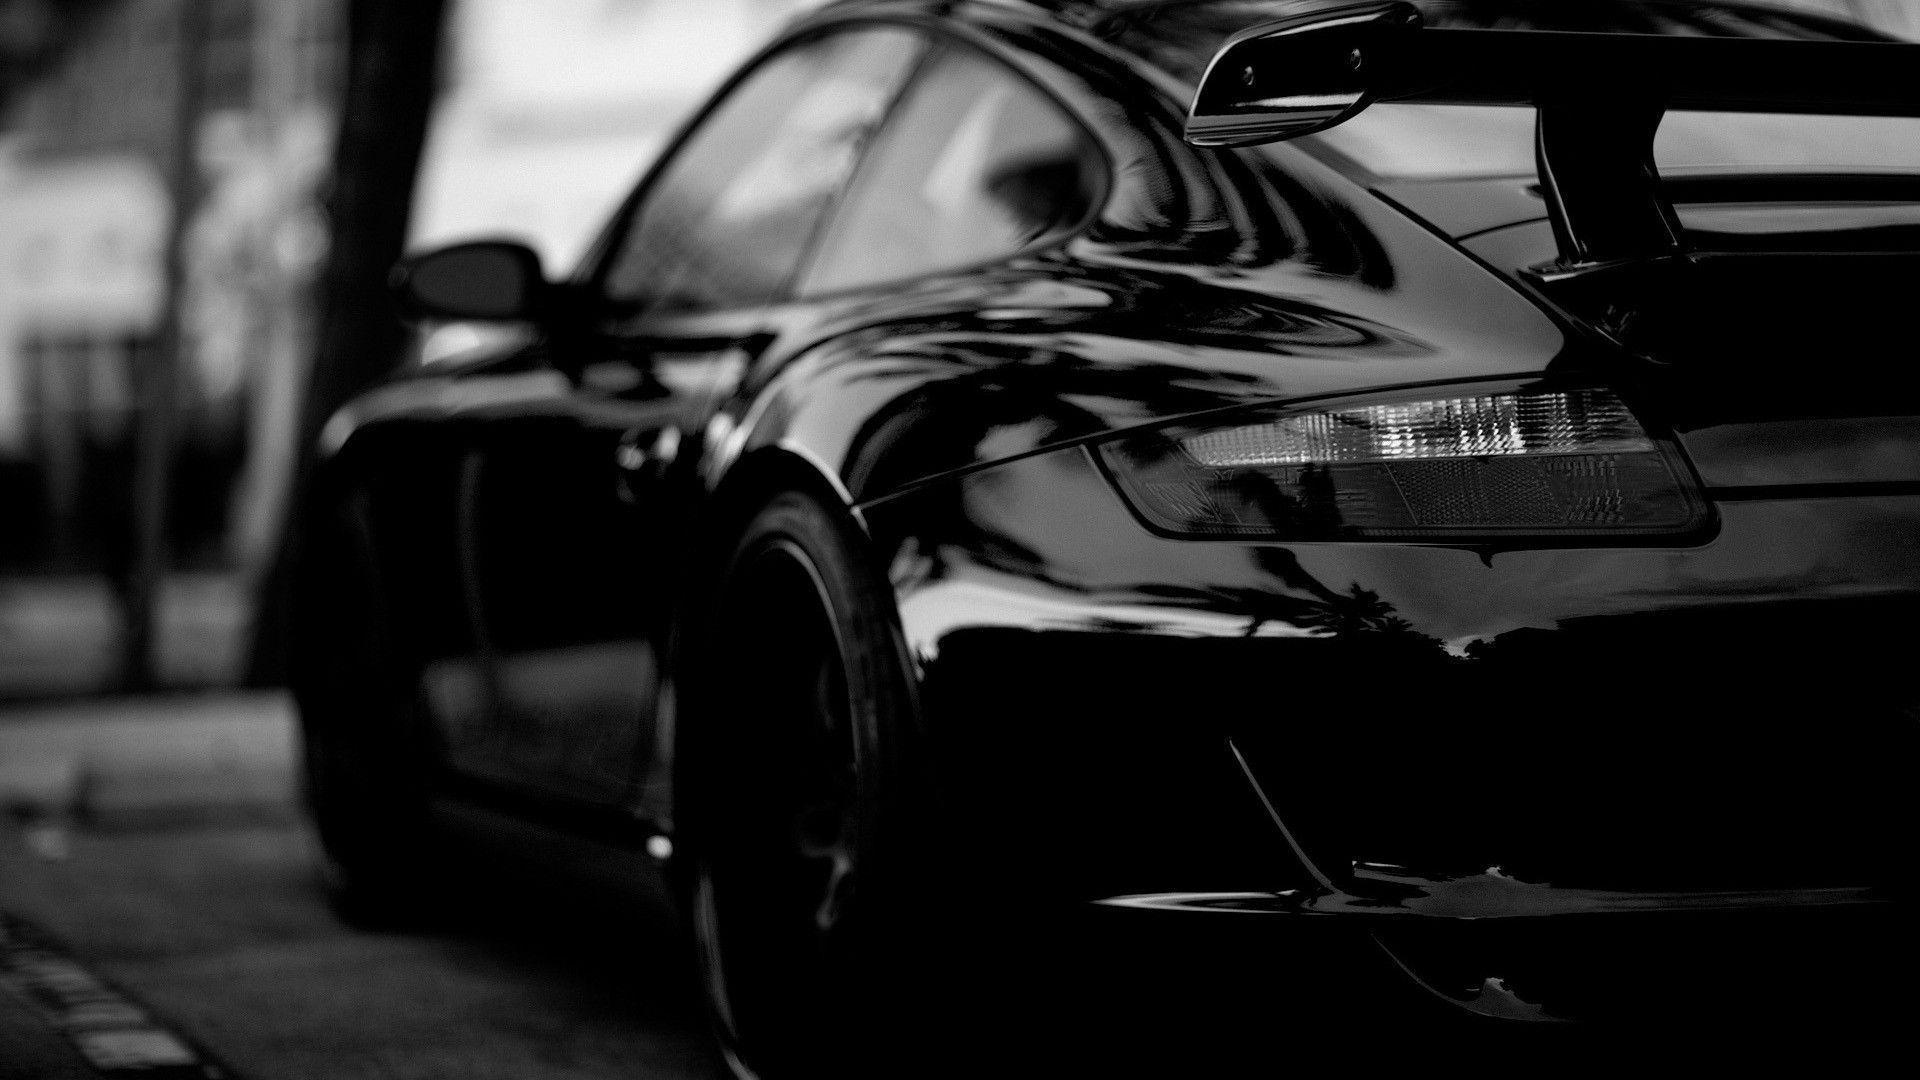 Black And White HD Wallpaper Car Picture 17427 Full HD Wallpaper